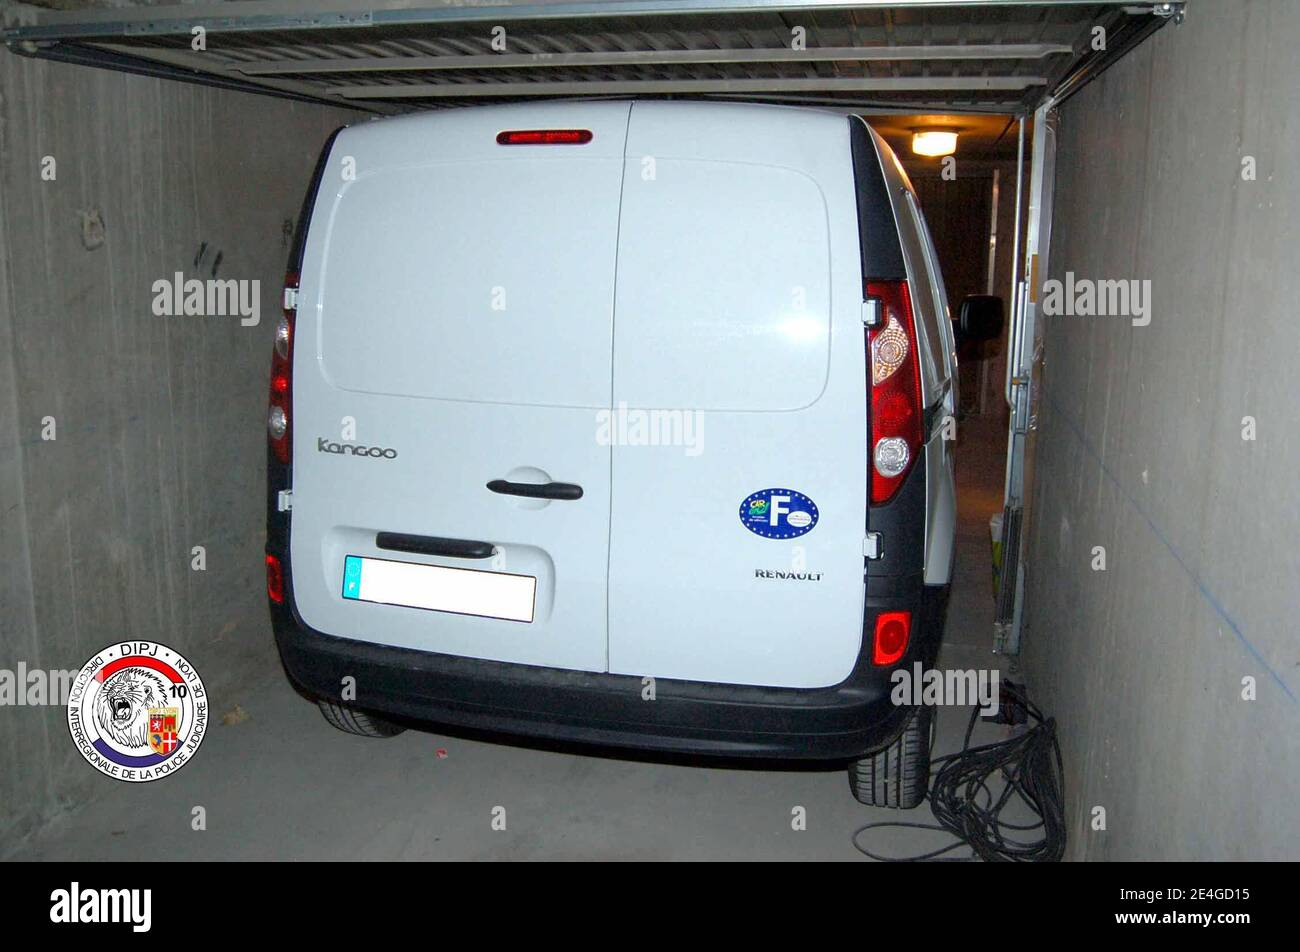 The small van rented by Toni Musulin, found in a garage with 9 million euro  in Lyon, France, on November 09, 2009. The conveyor hijacked 11,6 million  Euro. A Europe-wide hunt is